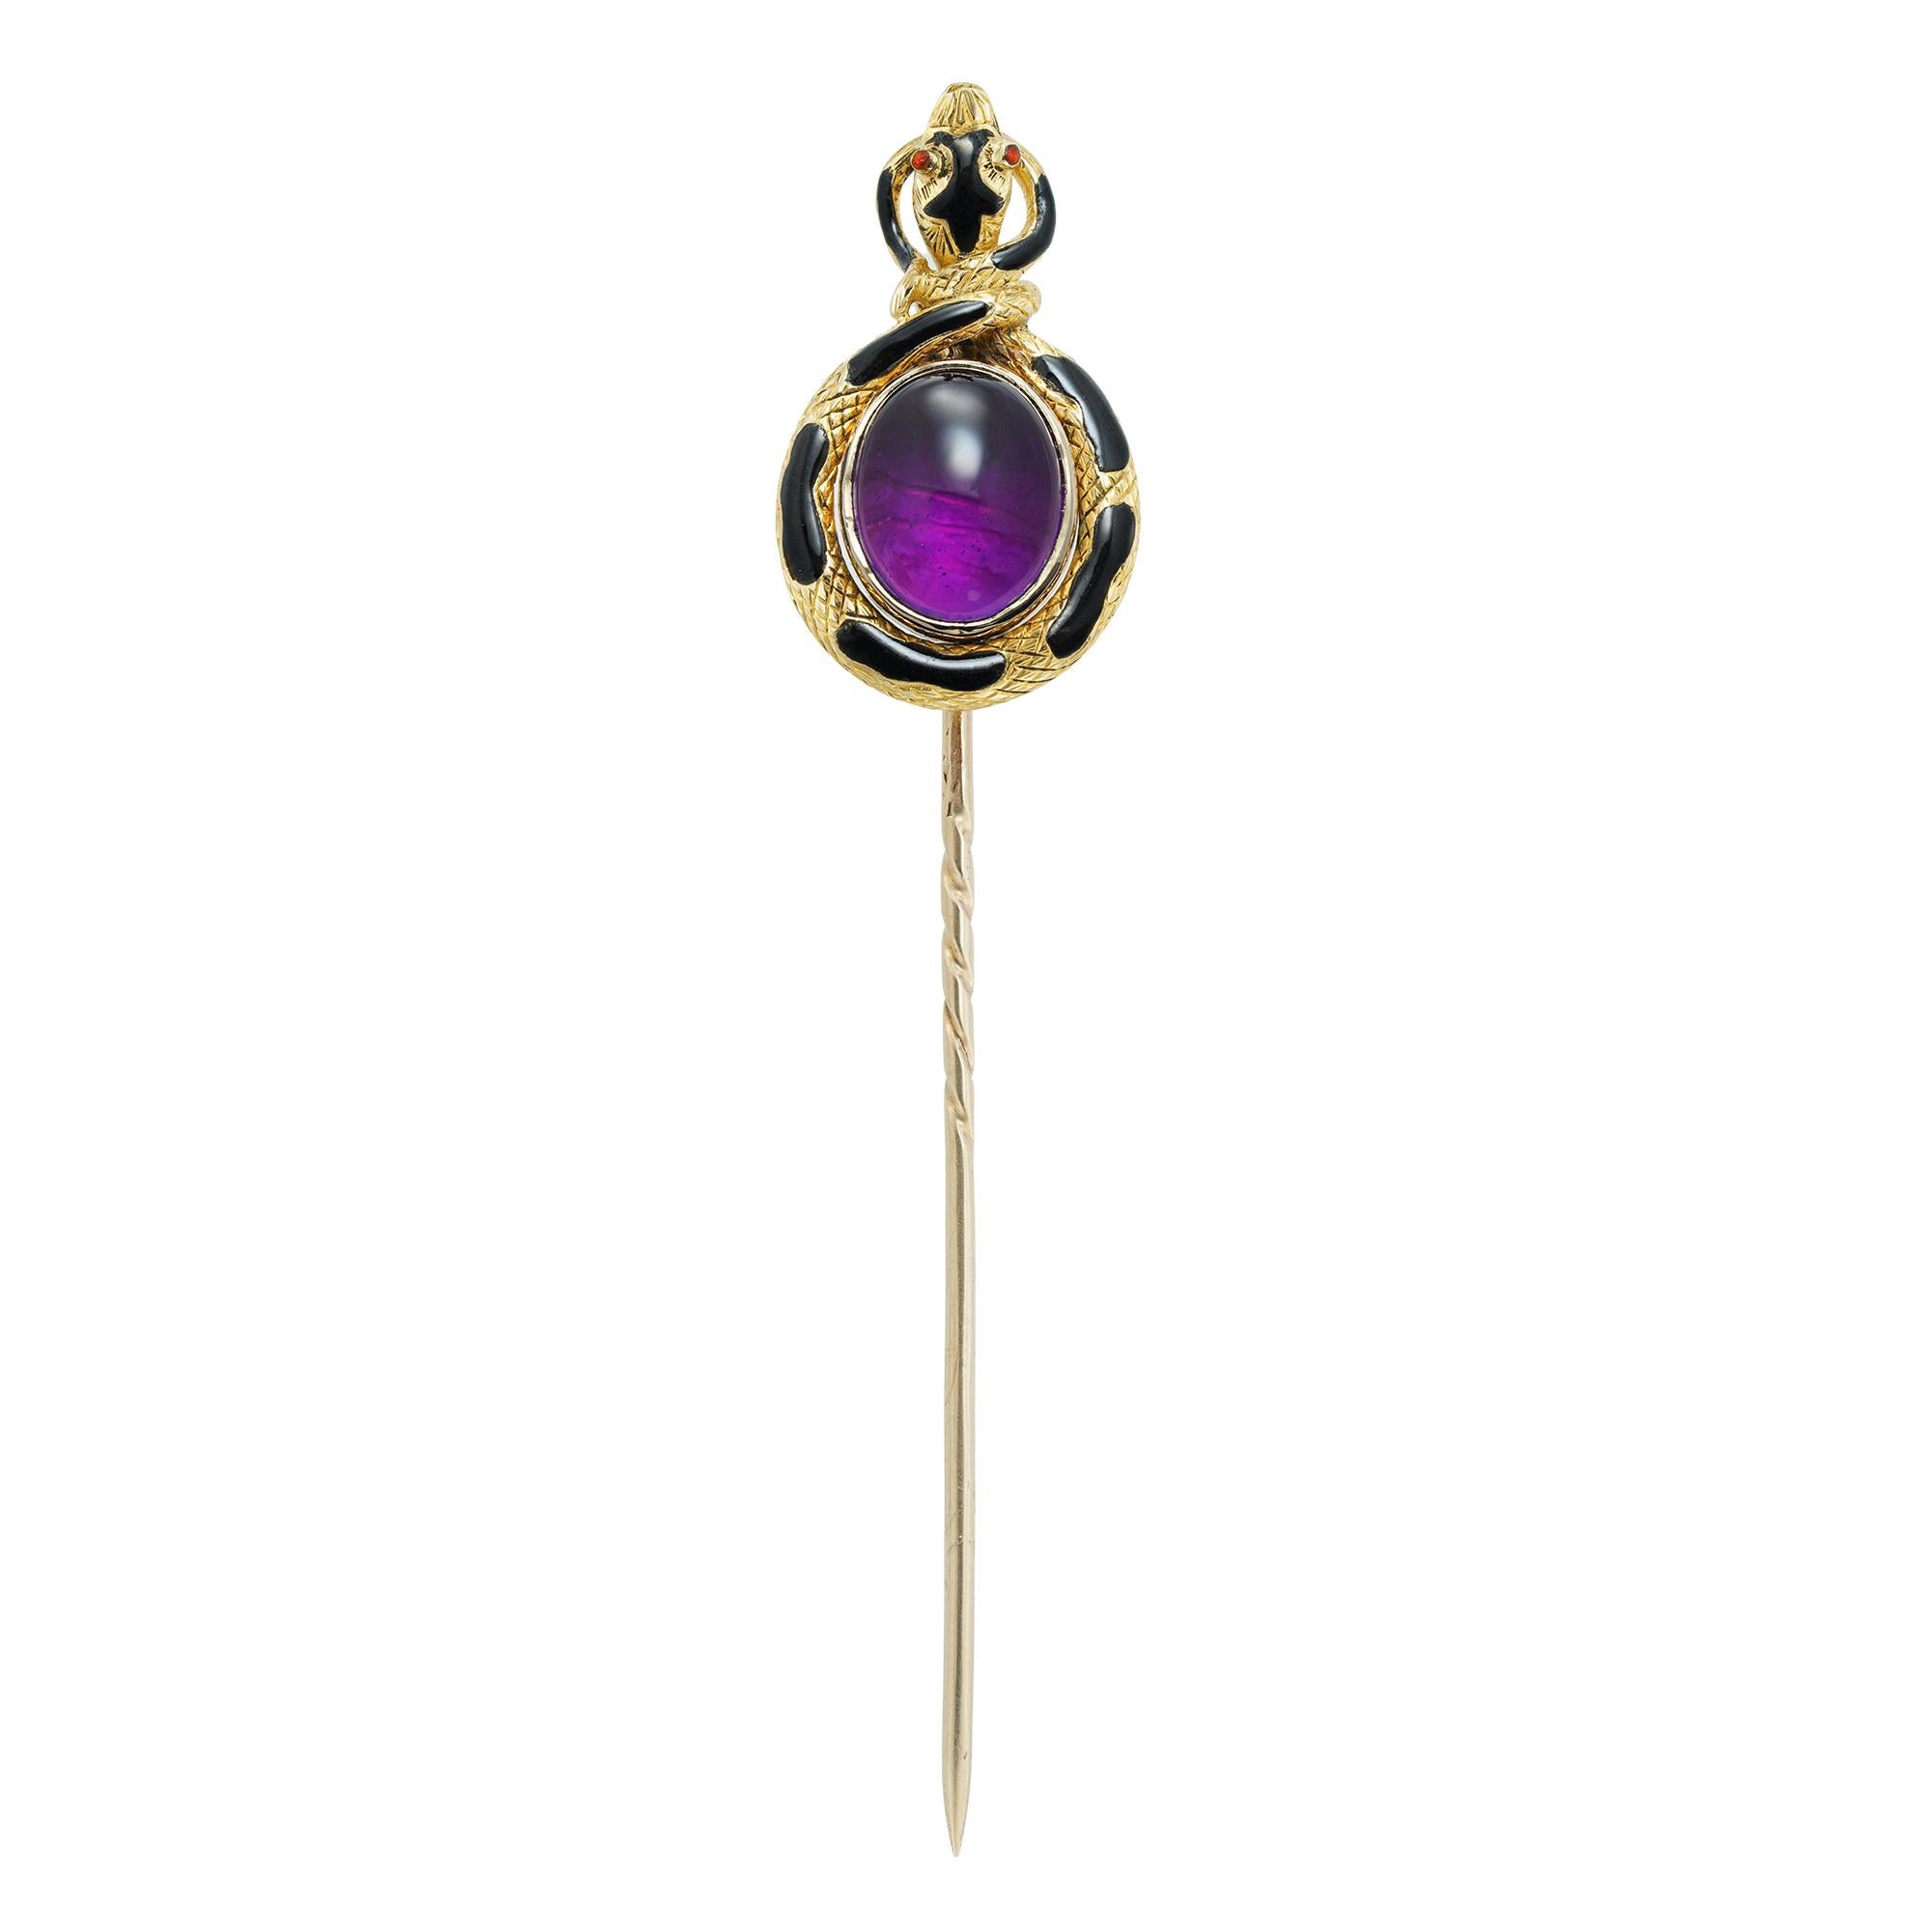 A Victorian amethyst and black enamel snake stick pin, the cabochon-cut amethyst measuring 9.6 x 8mm, rubover-set in yellow gold surrounded by a yellow gold snake, the body with black enamel decorations and the head with red enamel eyes, all mounted